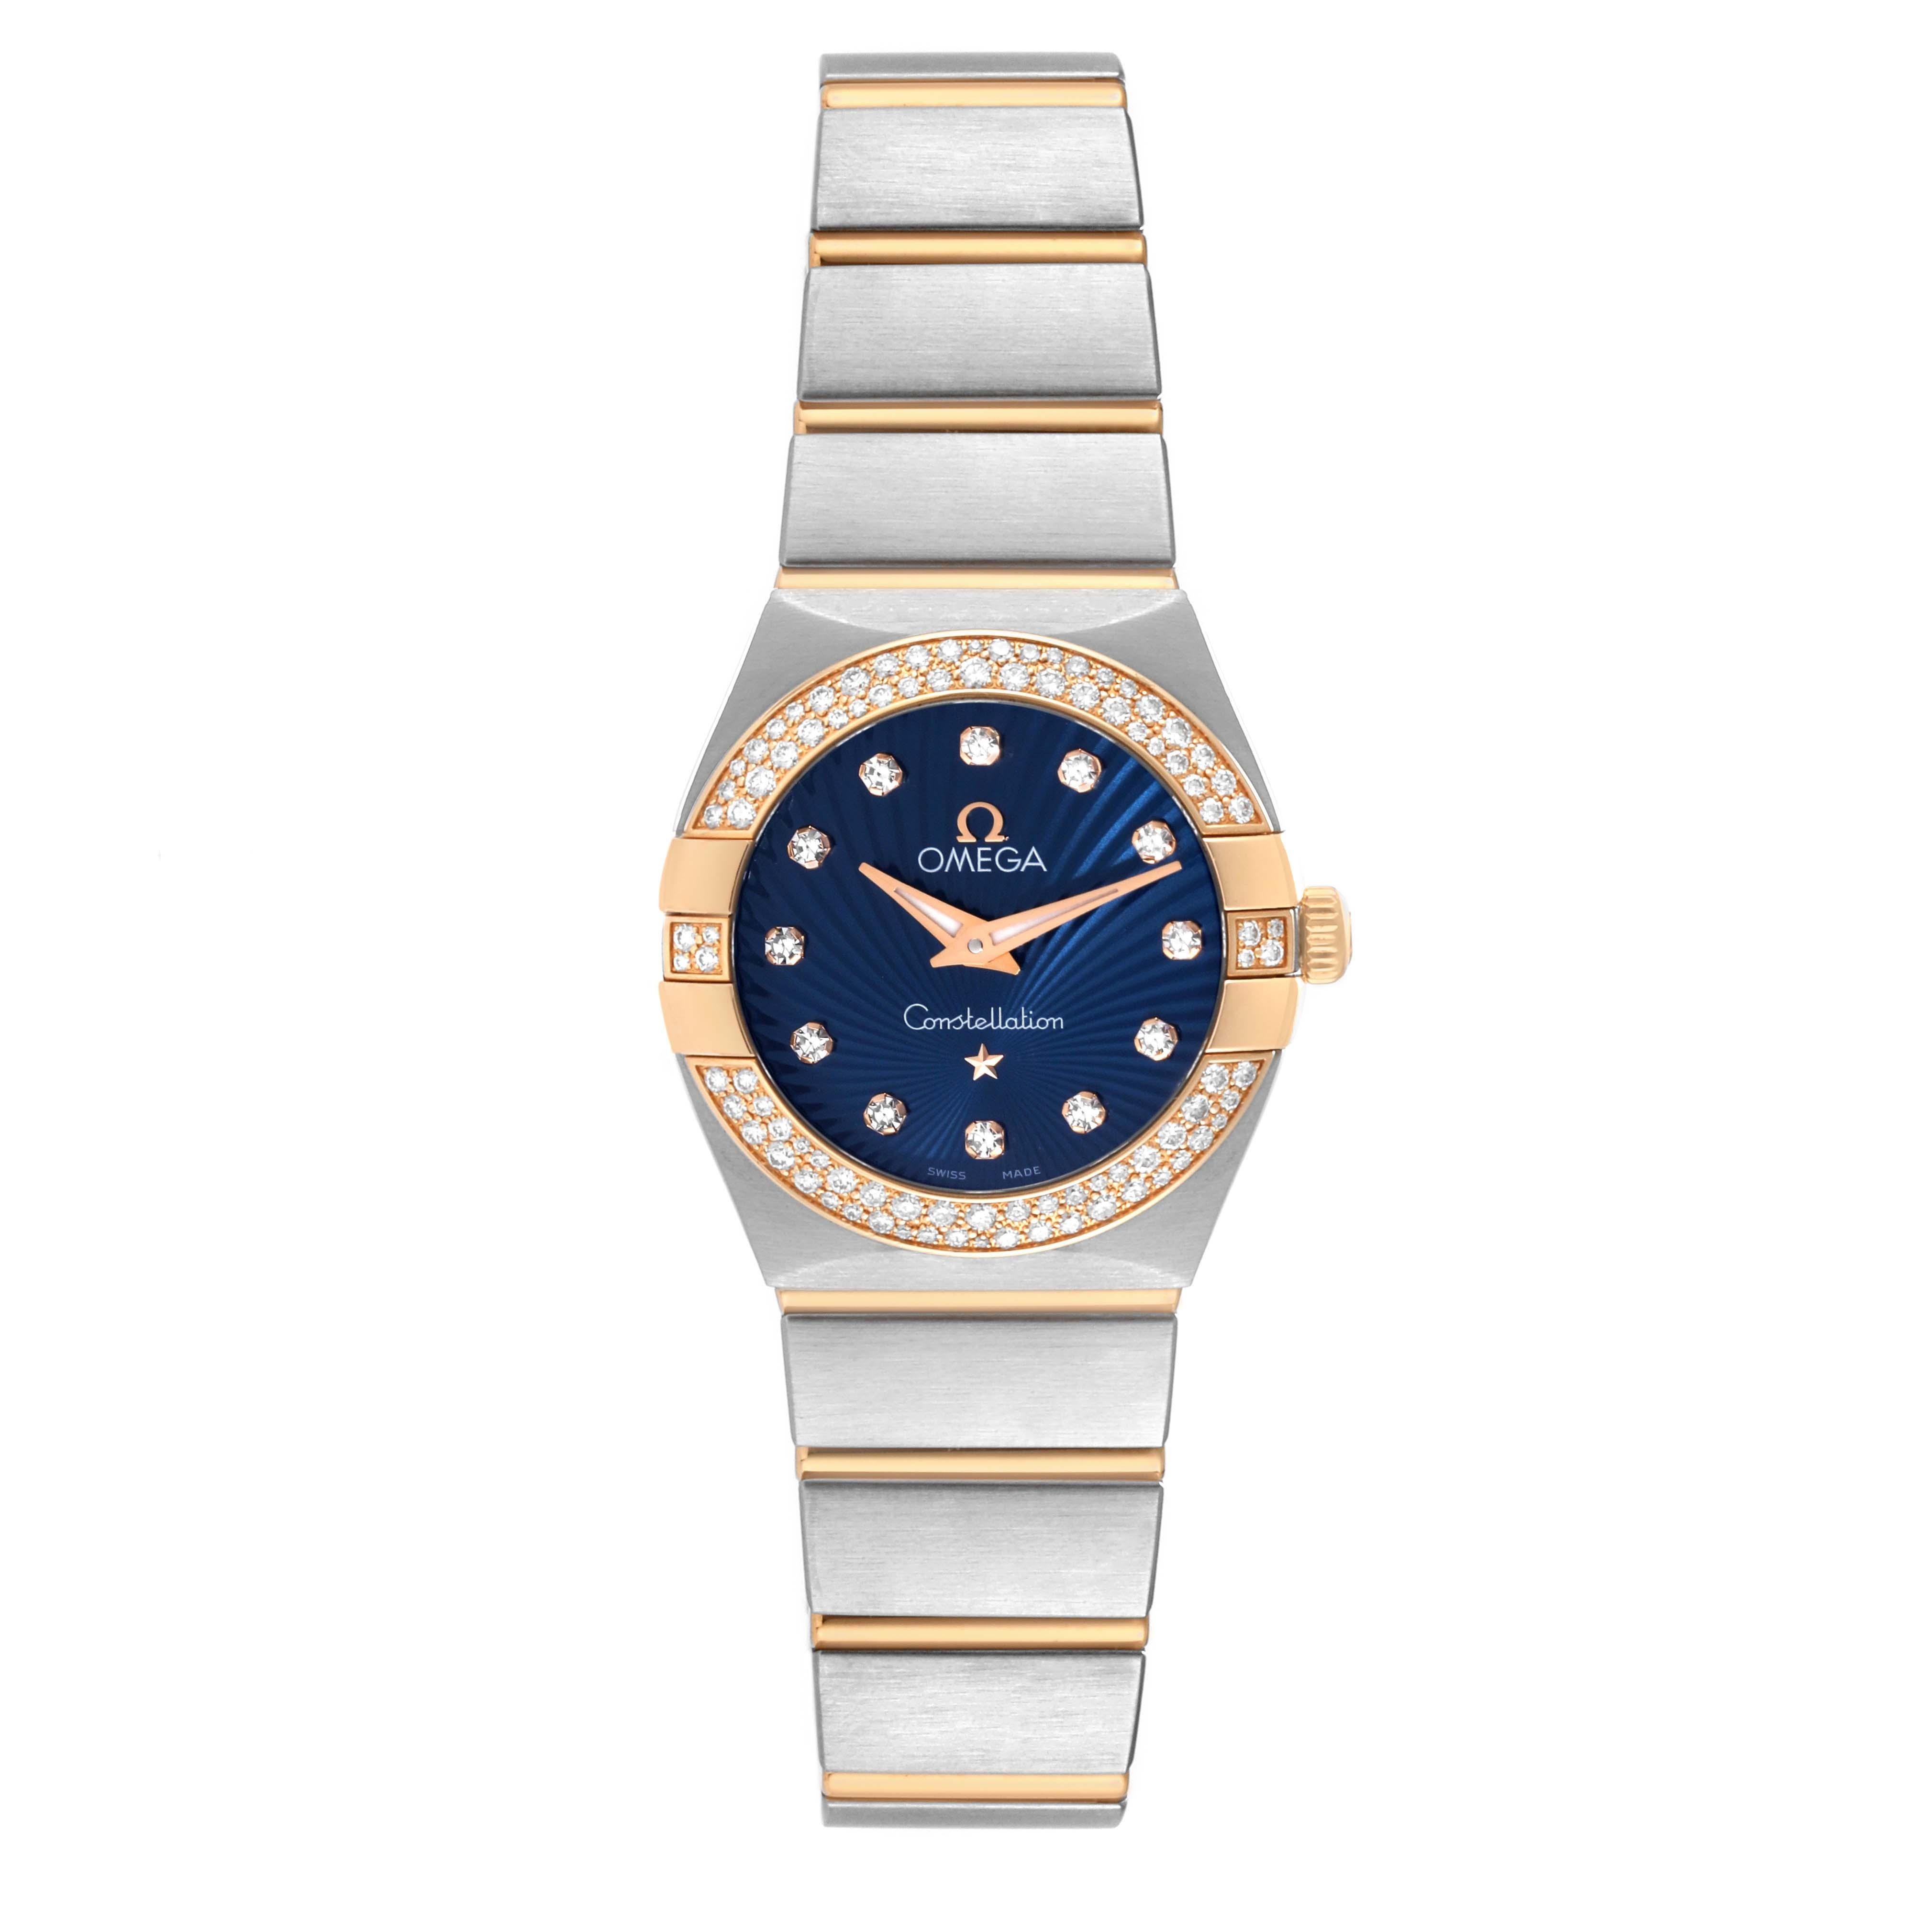 Omega Constellation Steel Rose Gold Diamond Ladies Watch 123.25.24.60.53.001. Quartz precision movement. Stainless steel and 18K rose gold case 24.0 mm in diameter. Omega logo on a 18K rose gold crown. Original Omega factory 18K rose gold diamond